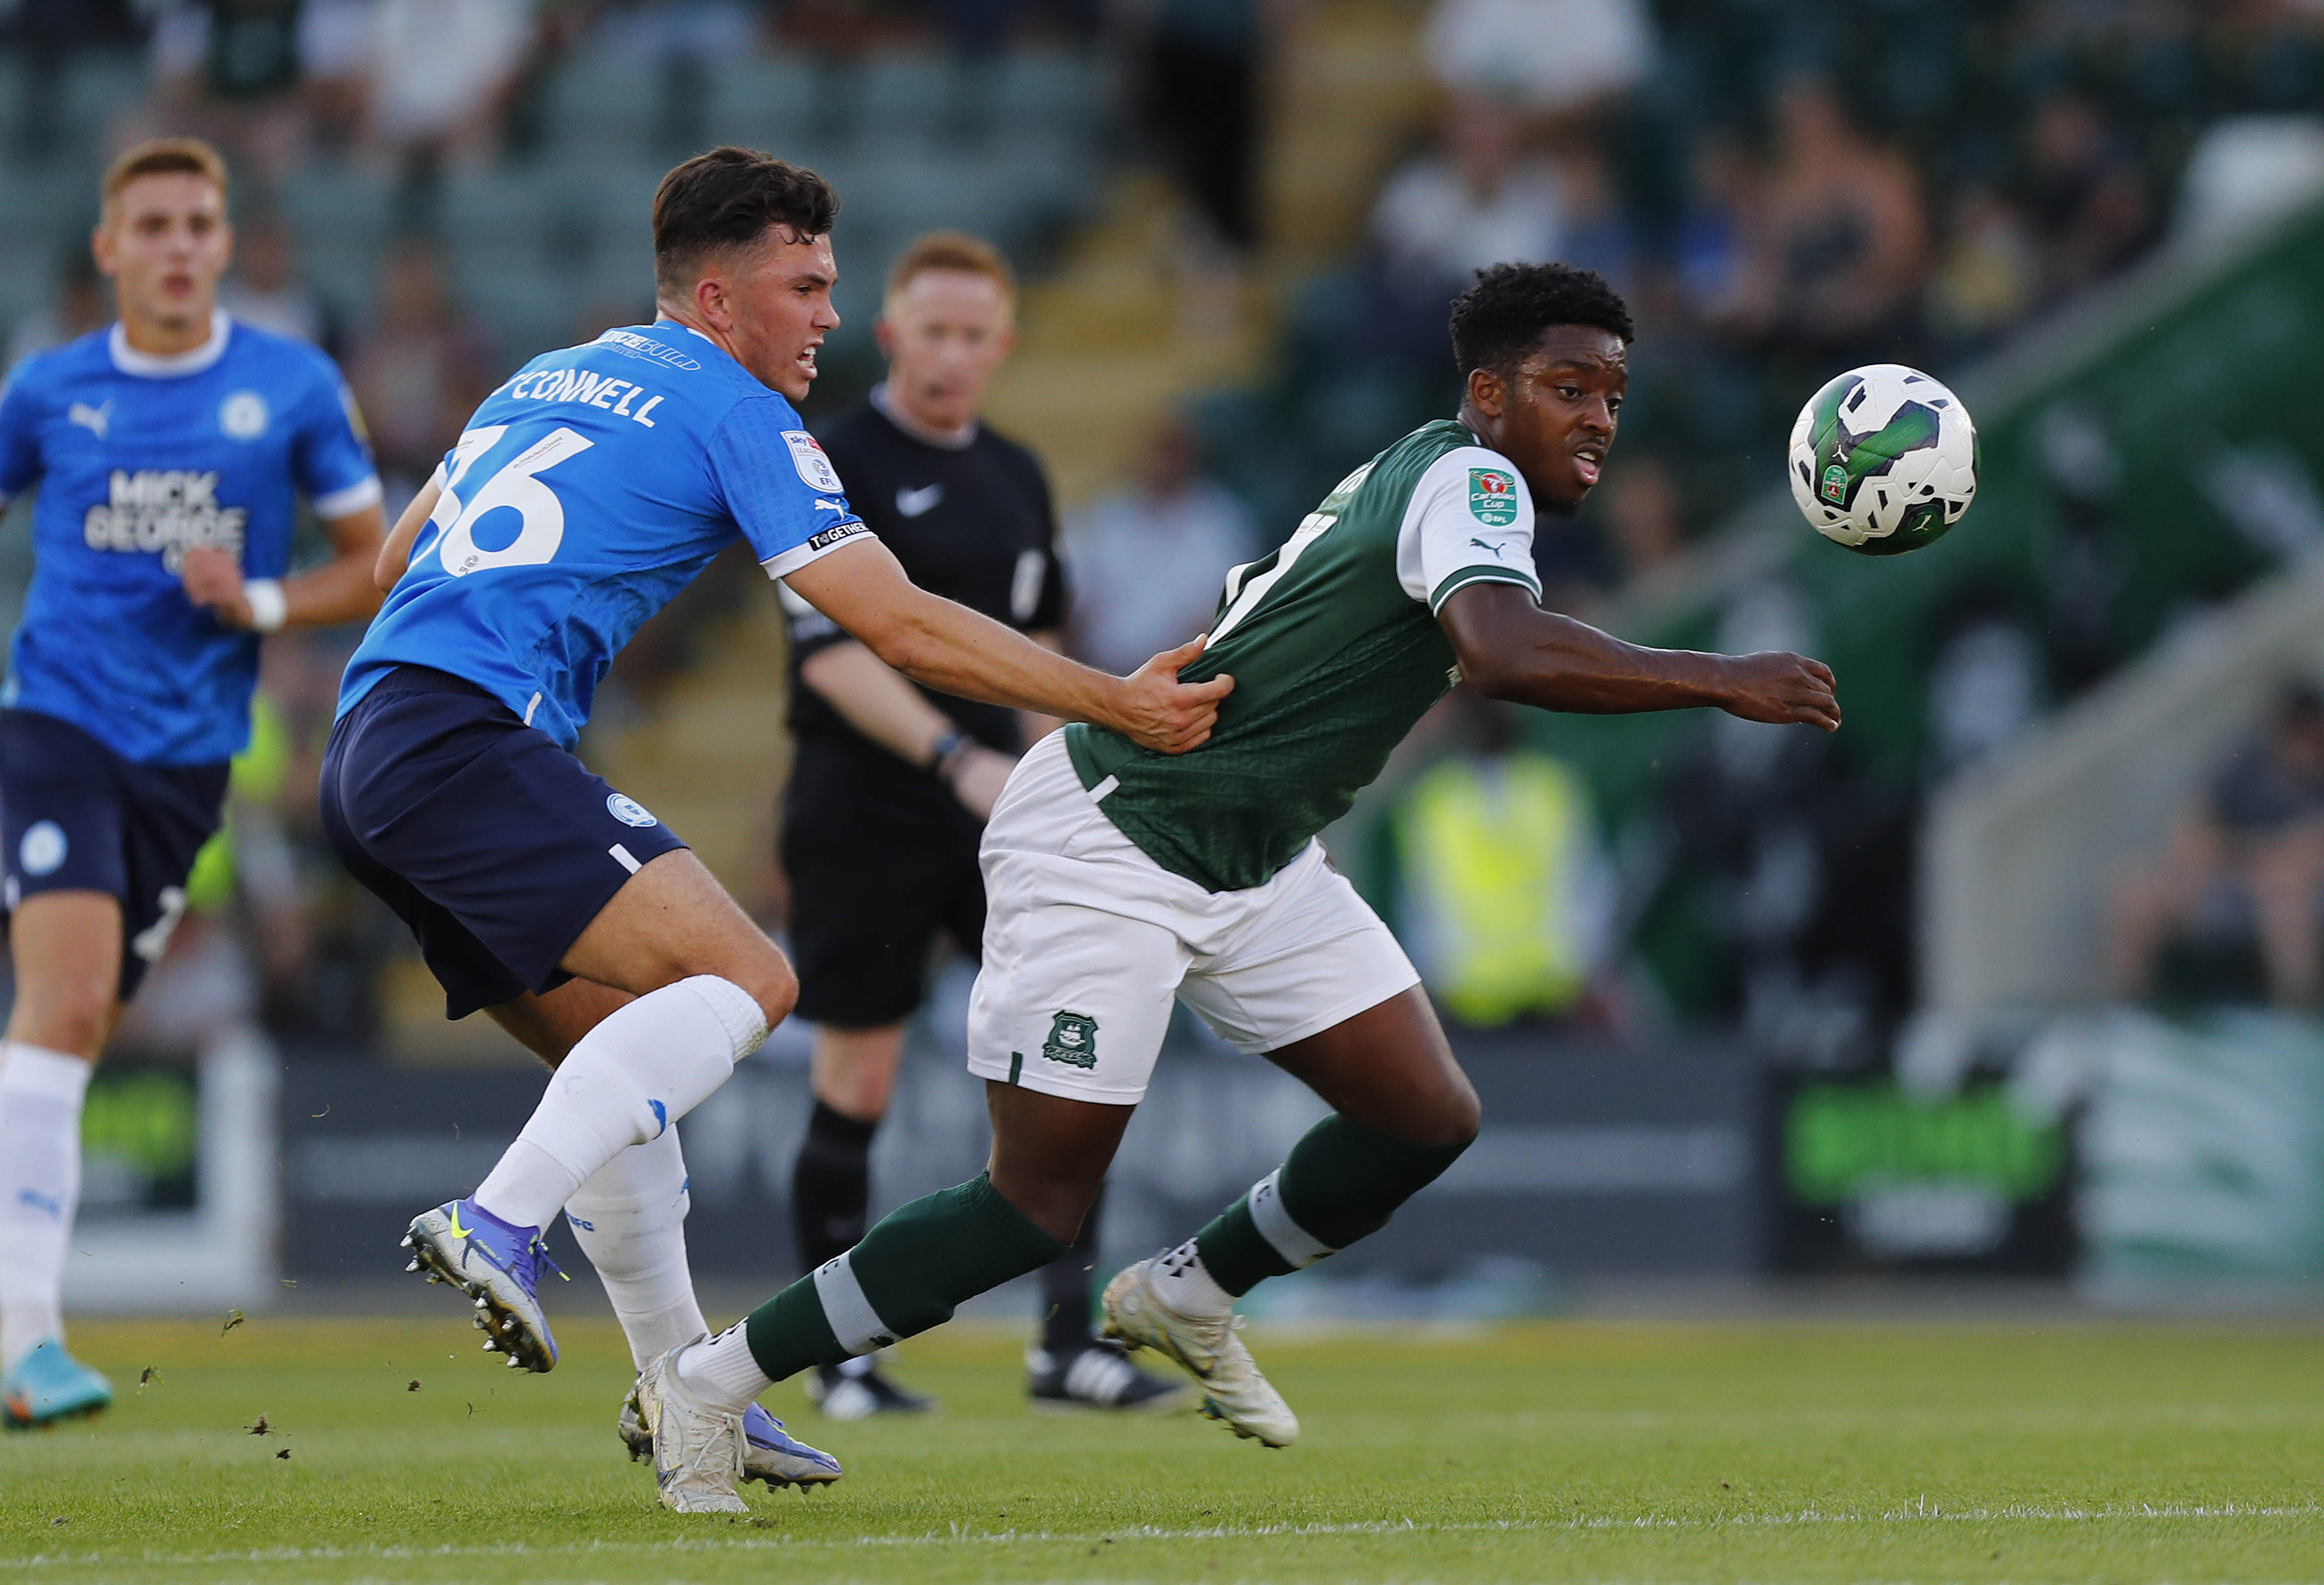 Niall Ennis spins away from his marker